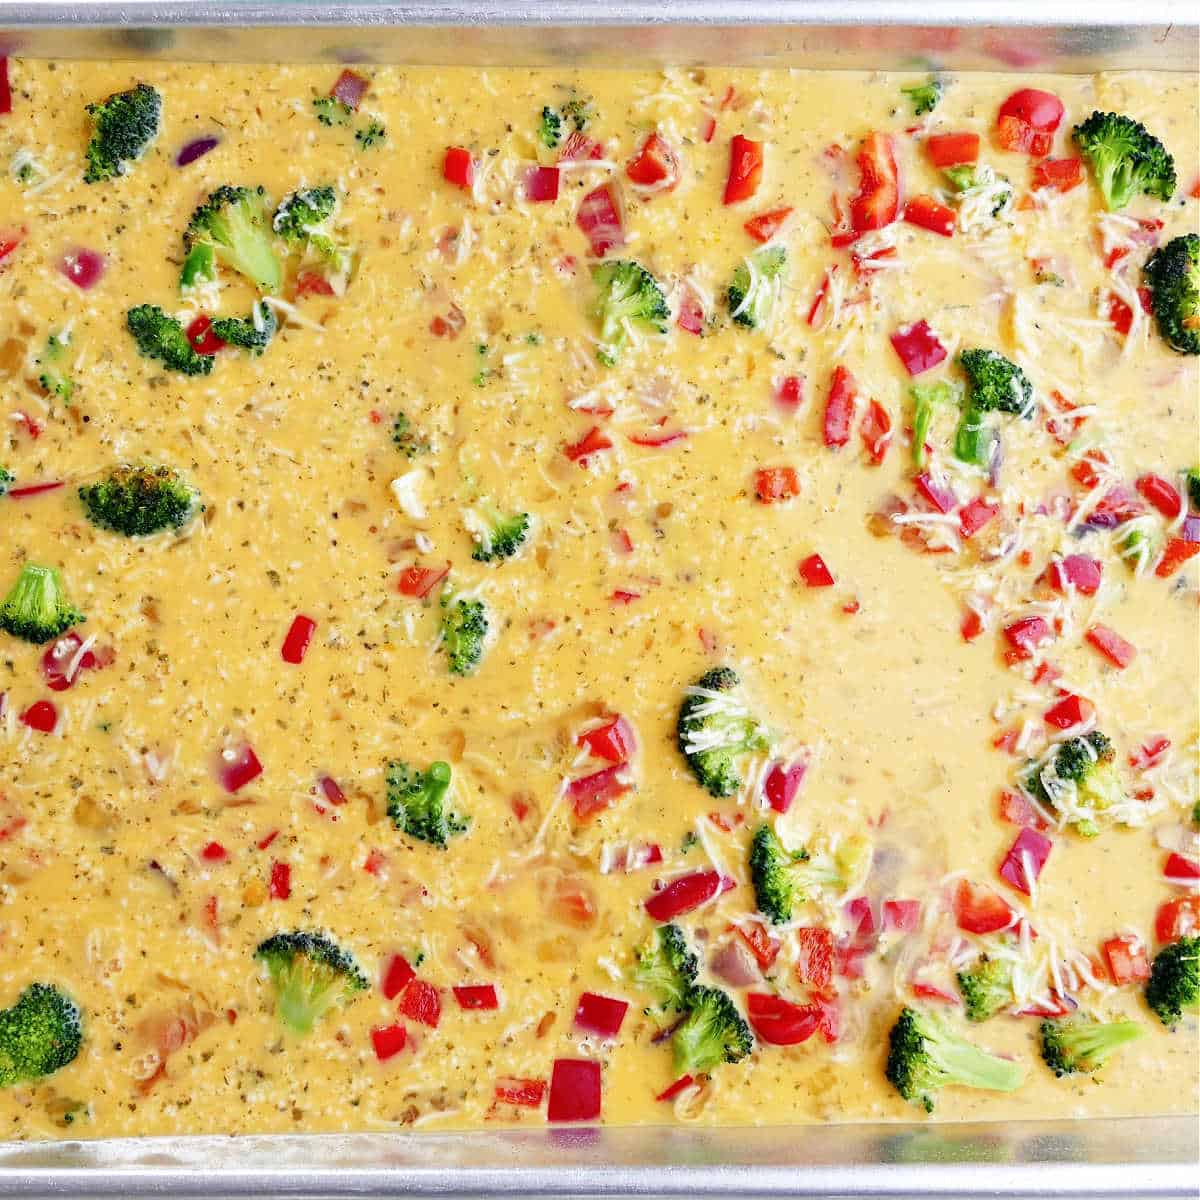 egg mixture poured over vegetables on a half sheet pan before baking